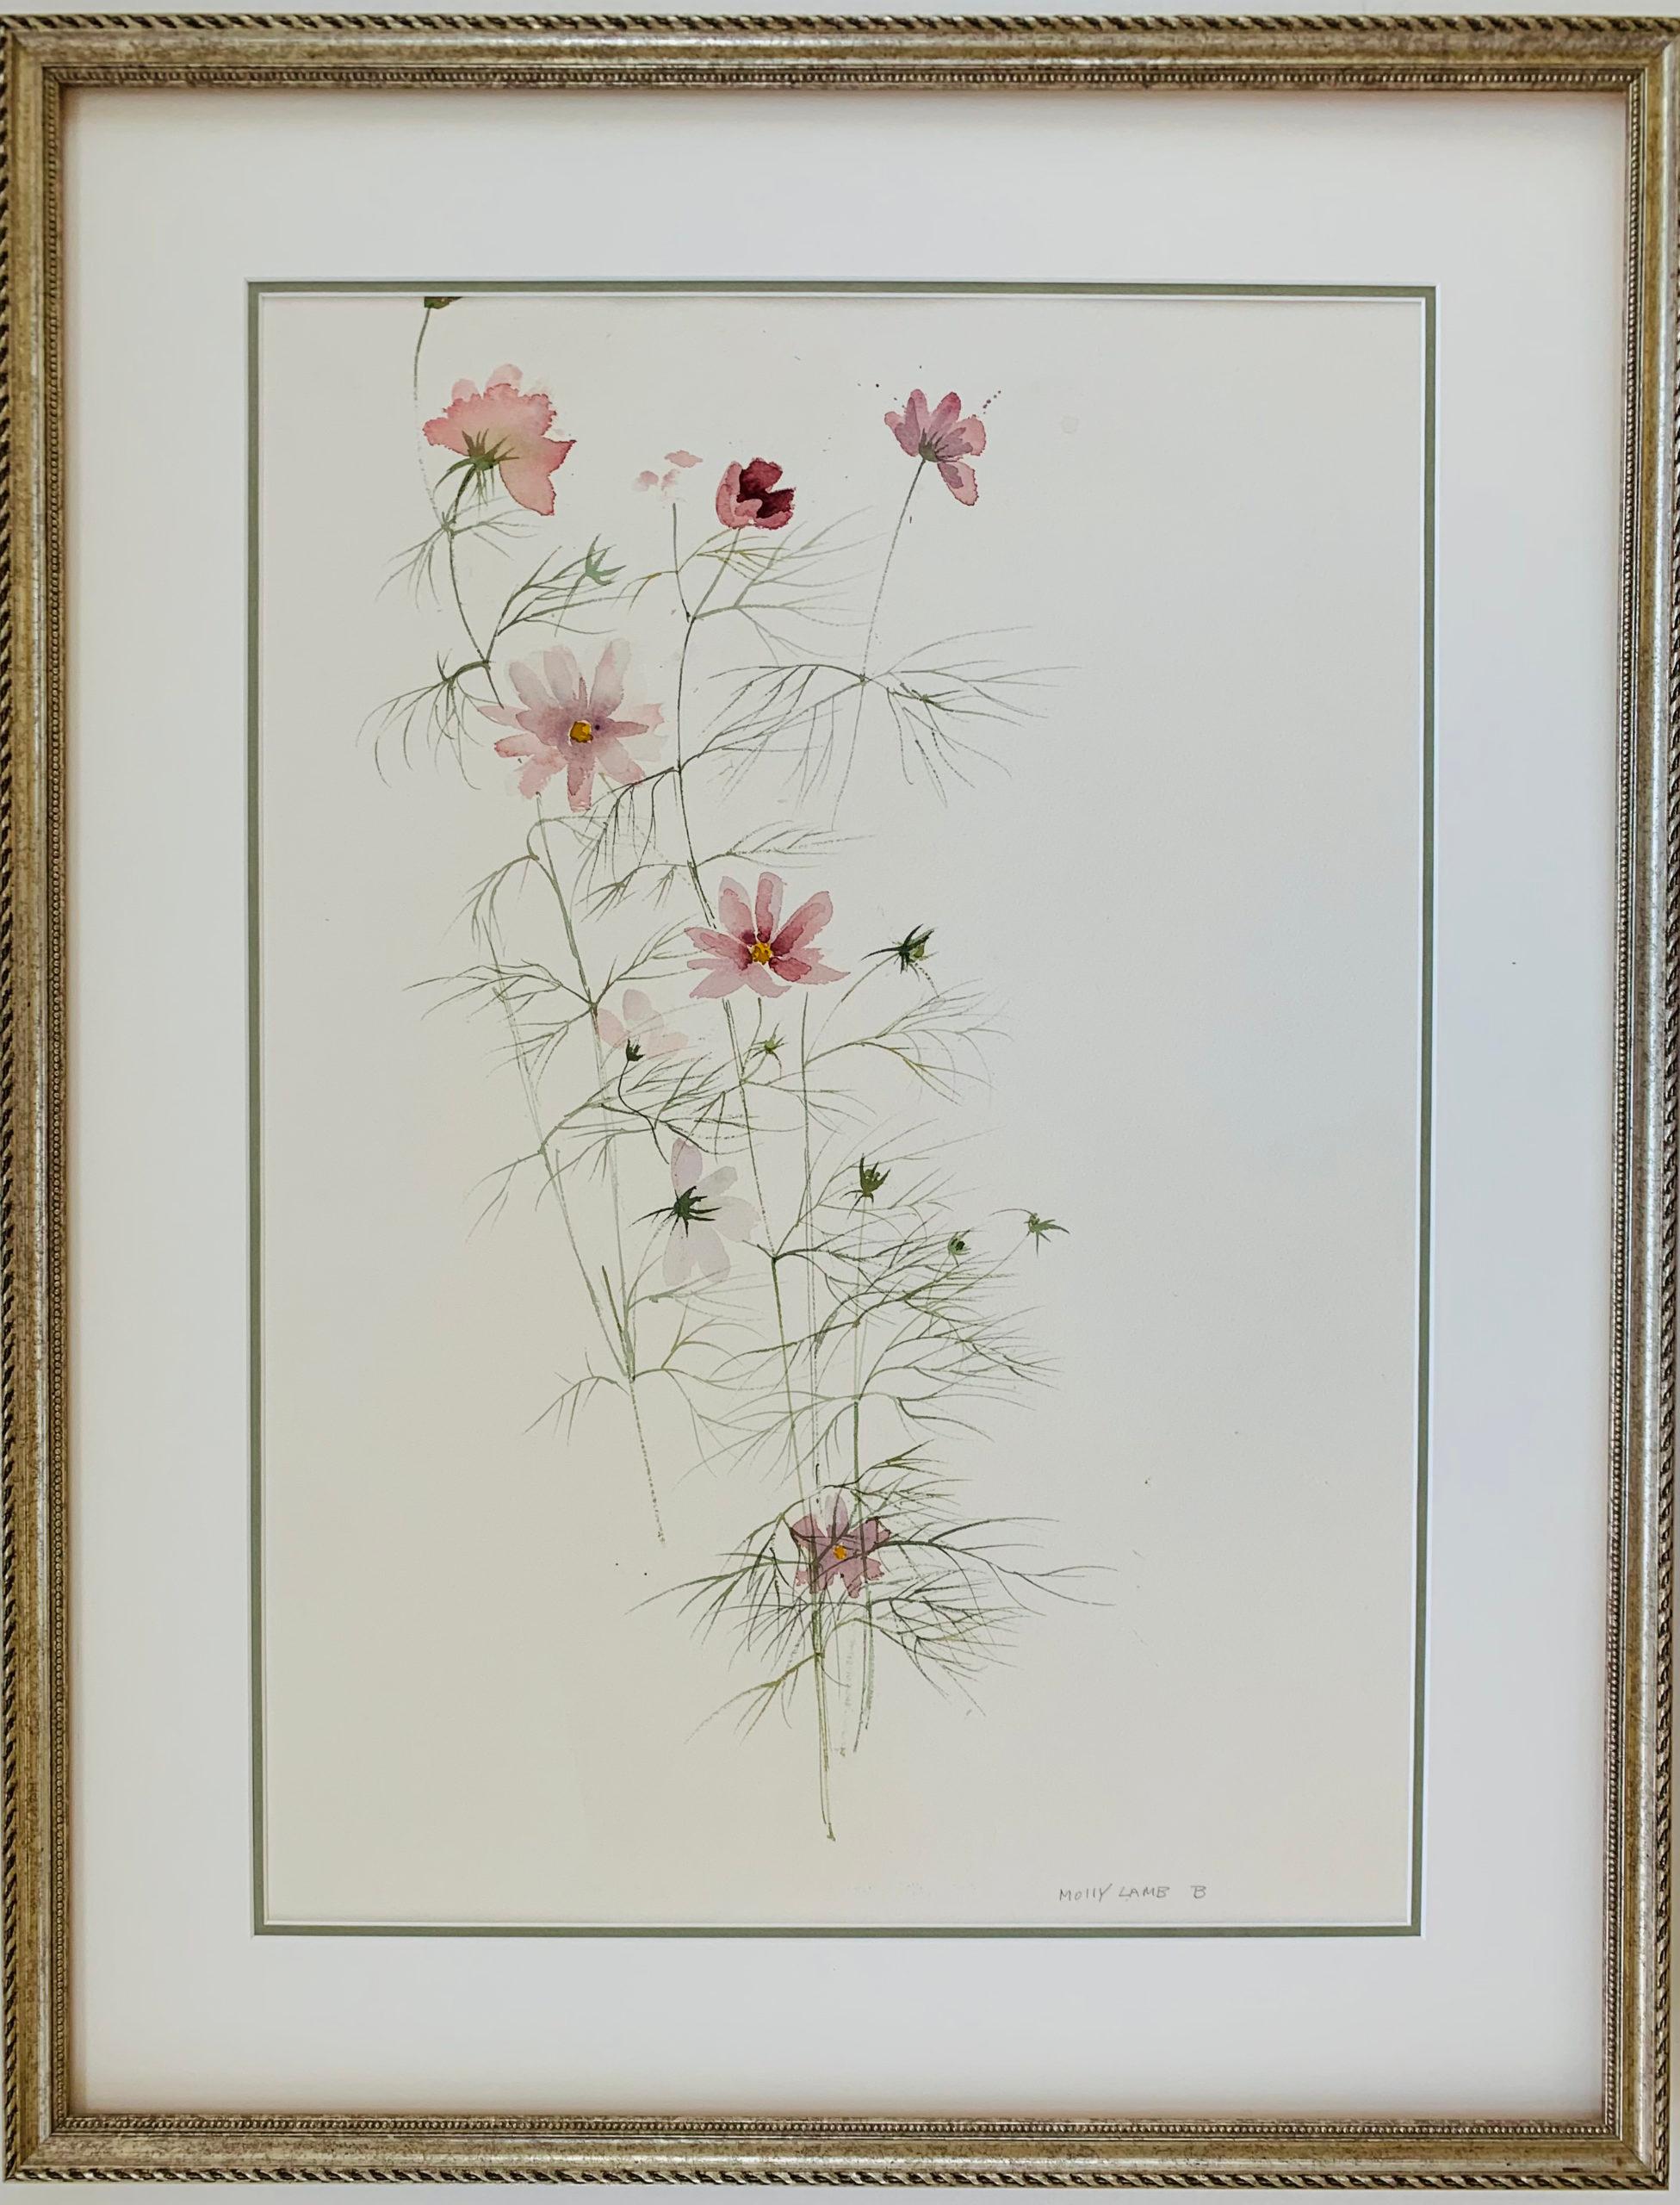 Molly Lamb Bobak, Canadian, 1920 – 2014
Cosmos 5
Watercolour
22 x 15 in
signed
framed


Molly Bobak Biography
(1922 - 2014) RCA
It could be said that Molly Lamb Bobak was destined to be an artist. She was born on Lulu Island, near Vancouver, British